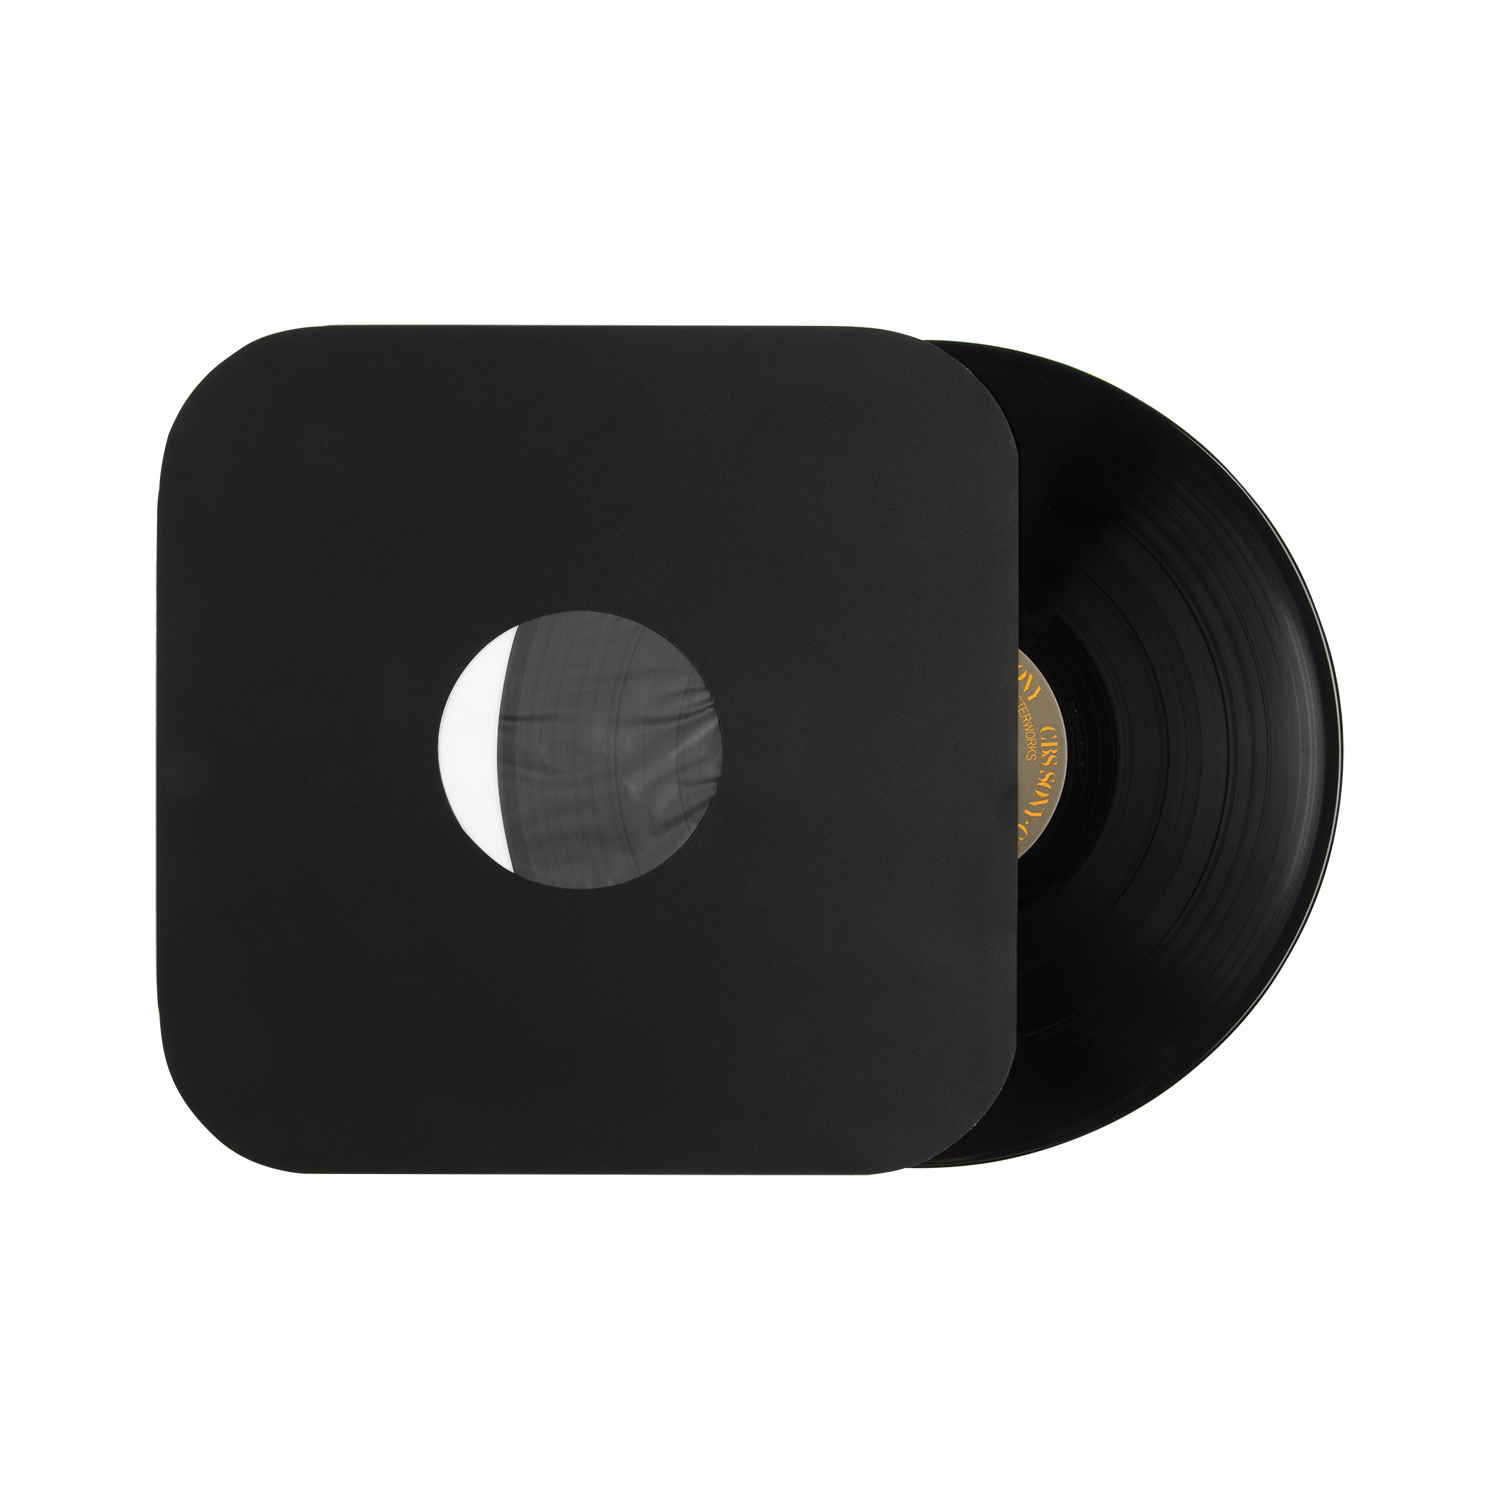 White/Black/Color Paper & Polylined LP Inner Sleeves with Round Corner